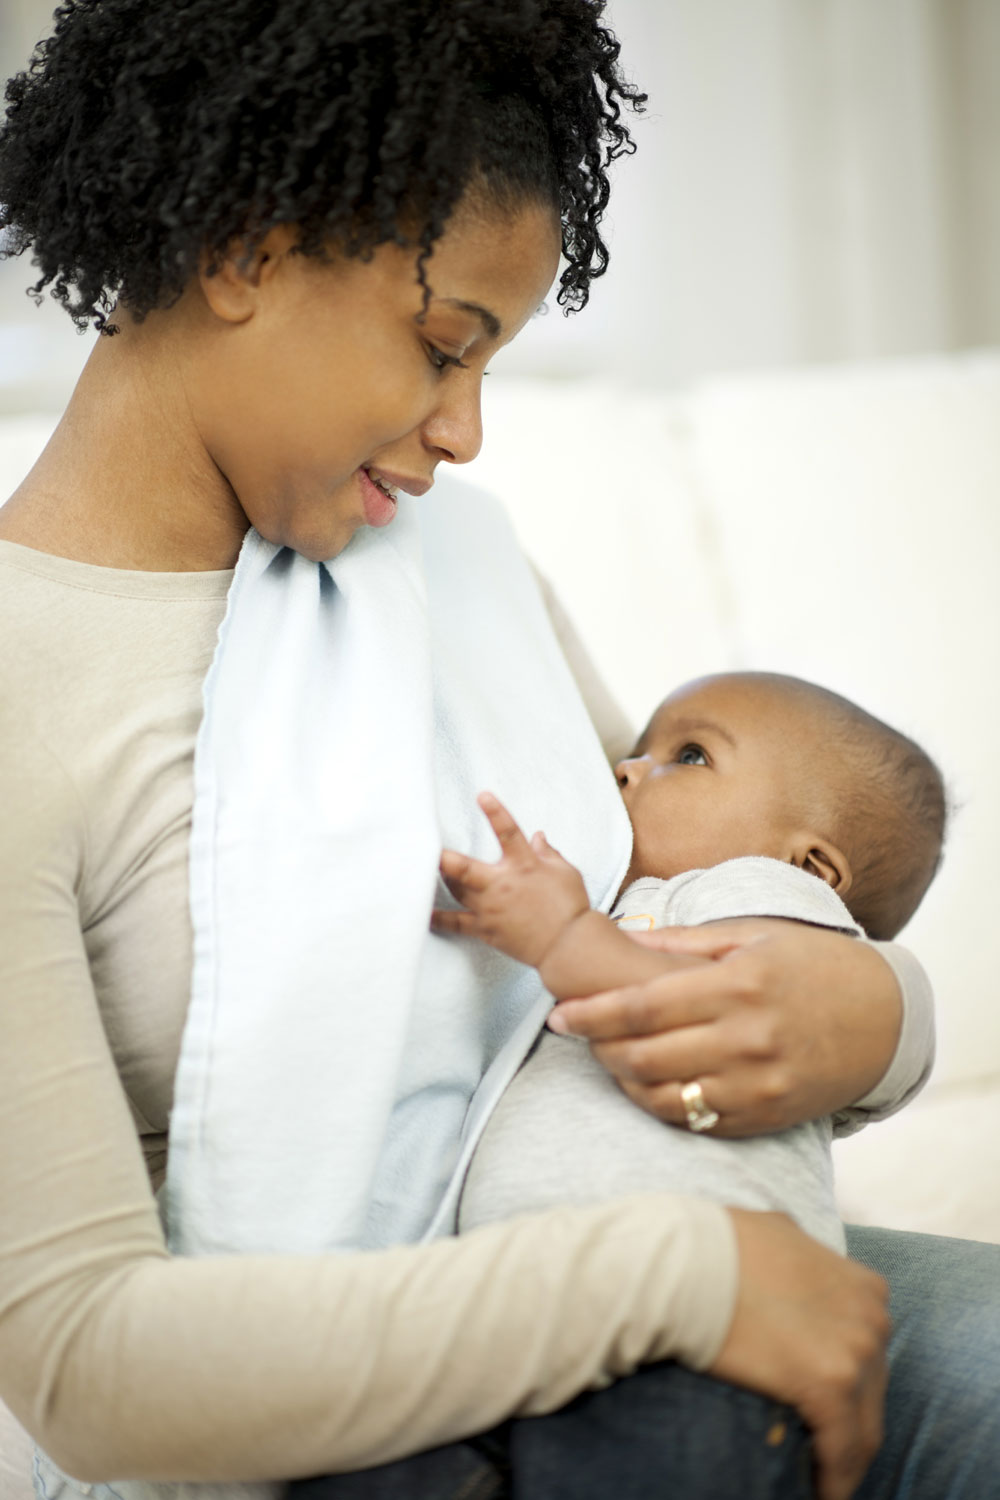 Supporting Breastfeeding in Child Care